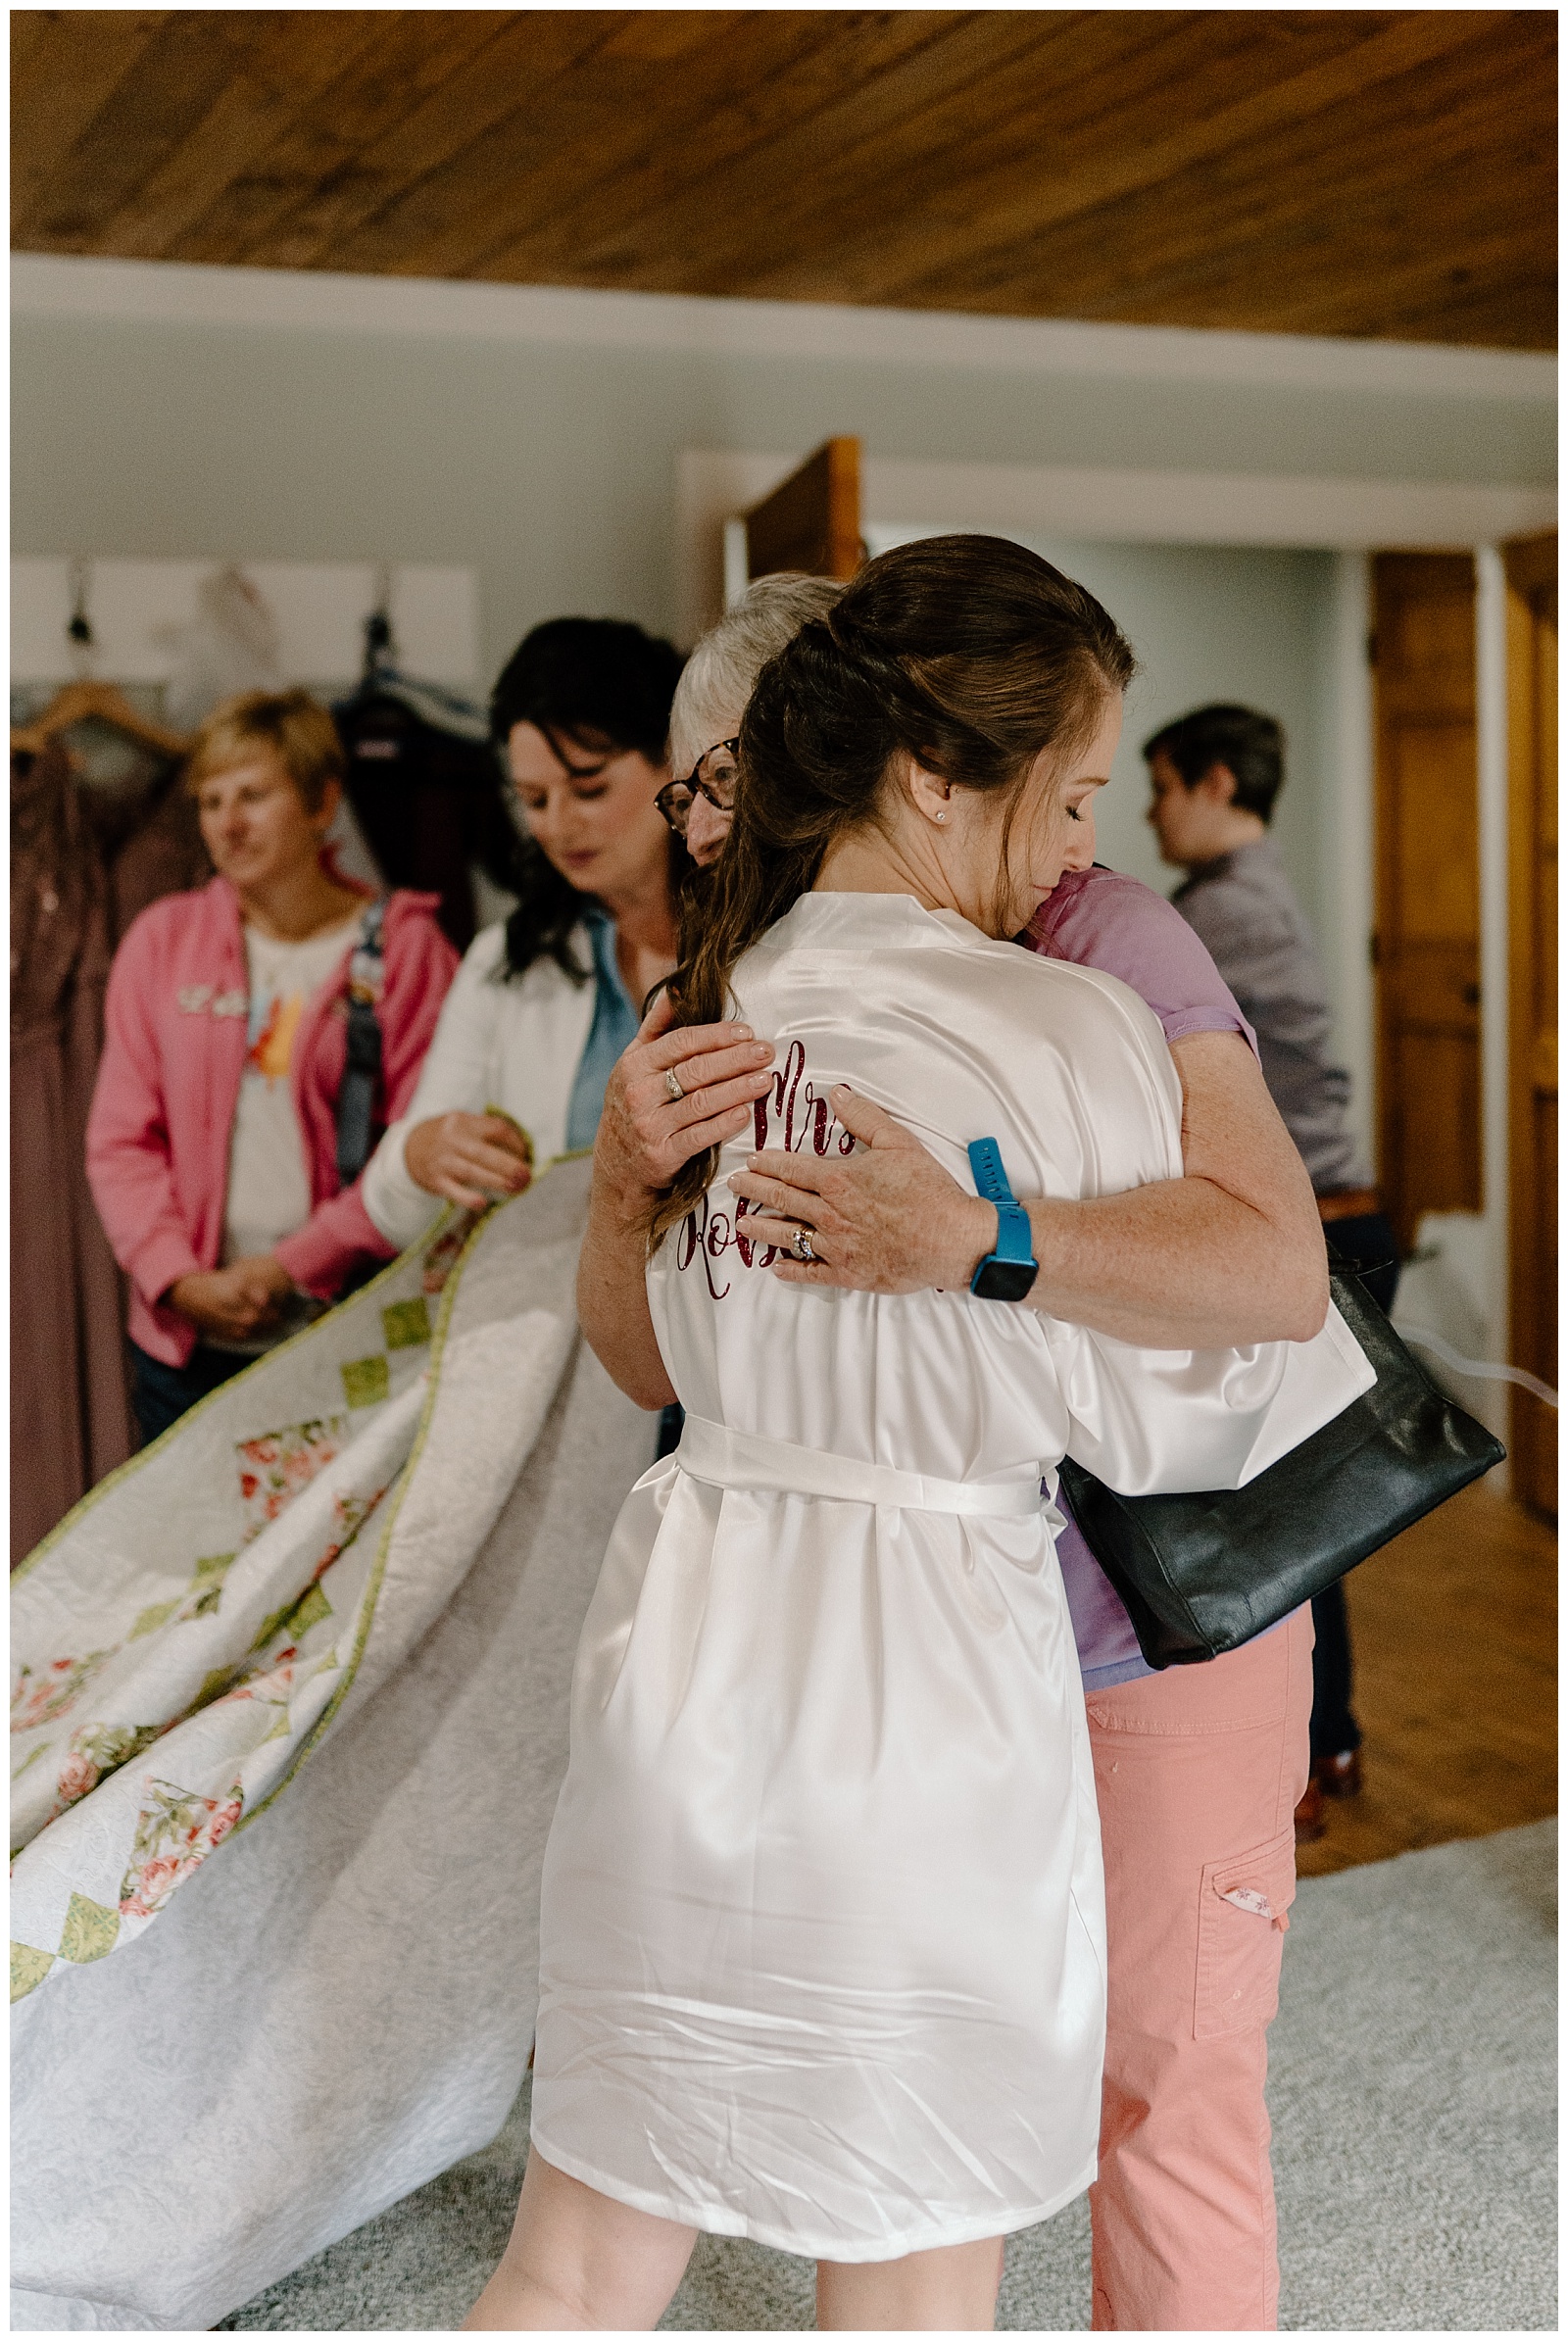 A bride opens a gift bag on her wedding day, which includes a quilt hand made by a family member.